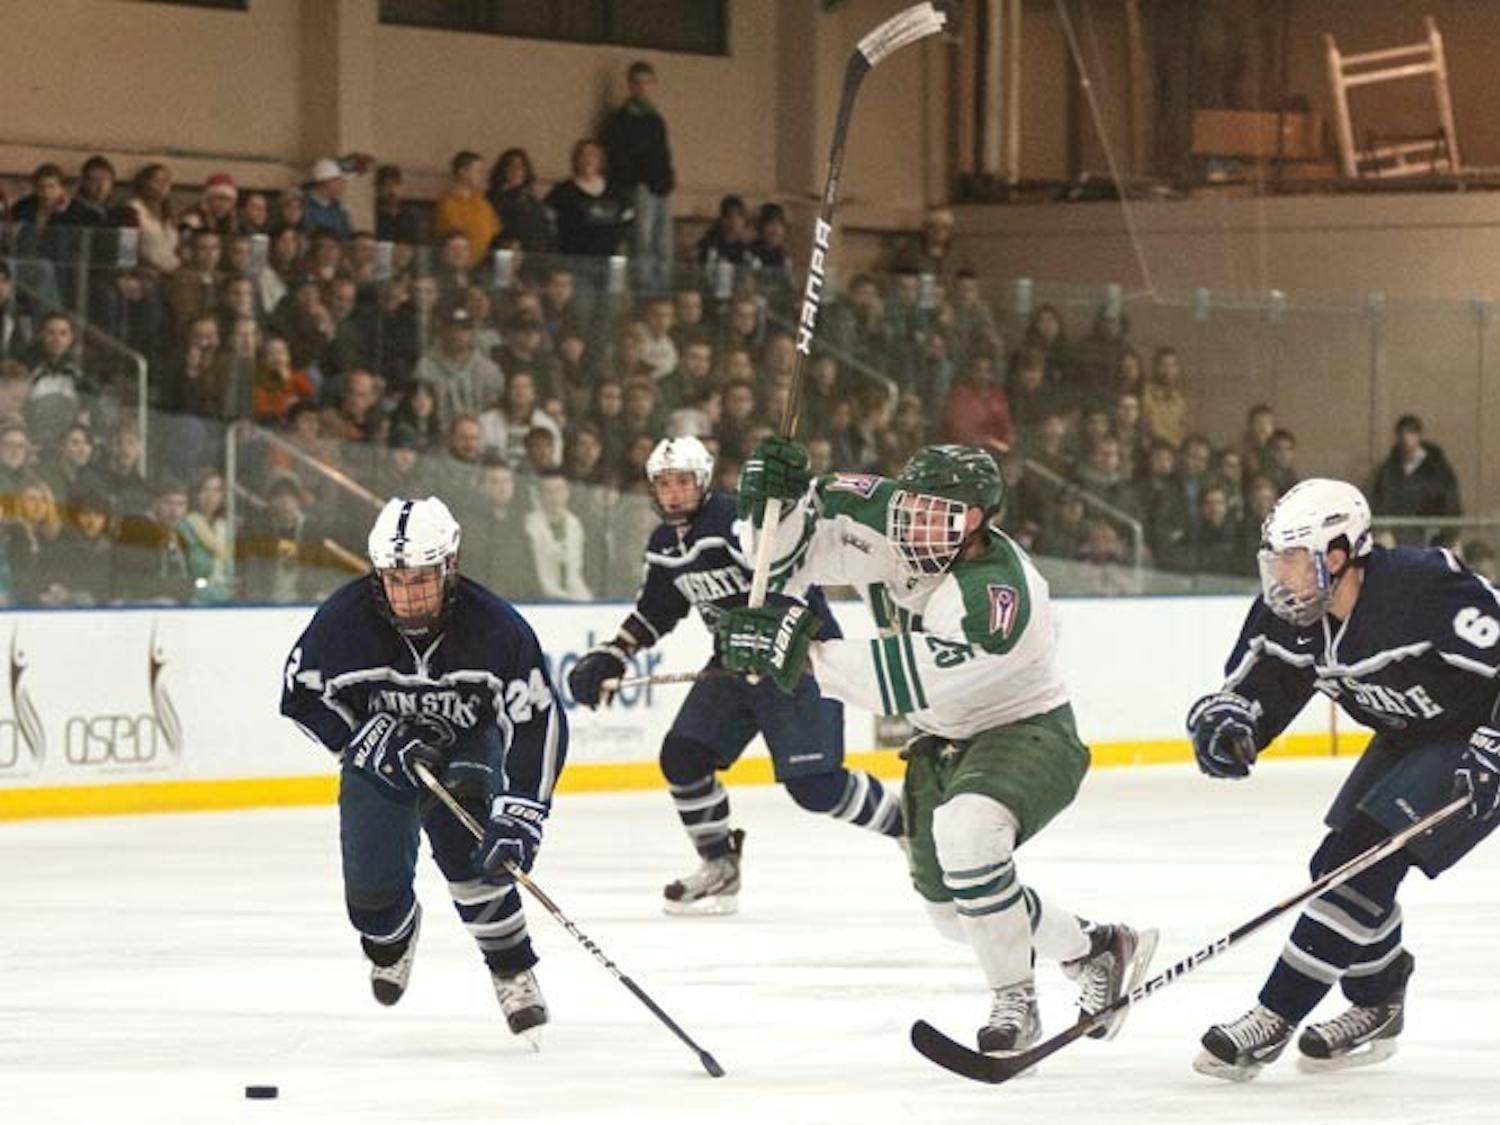 Hockey: Tough month roughs up Bobcats, but February brings new chances  